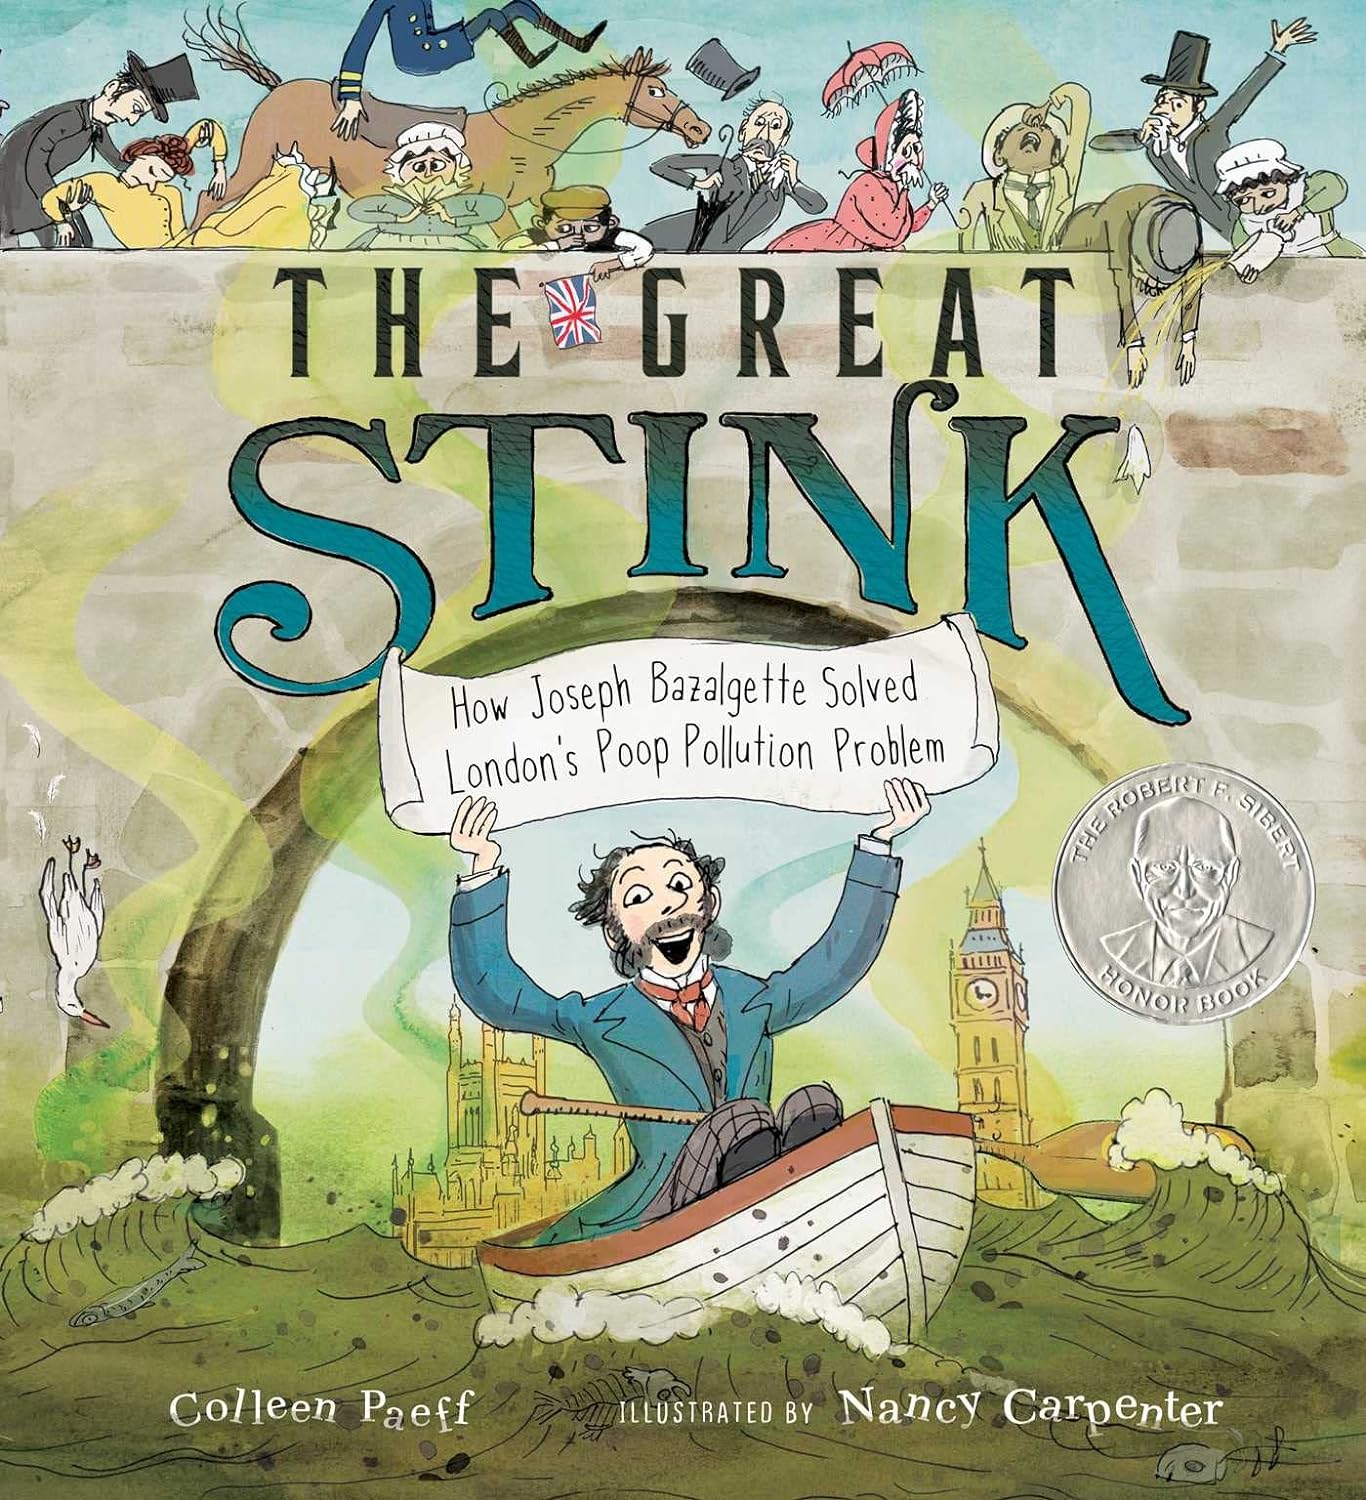 Cover illustration for "The Great Stink"